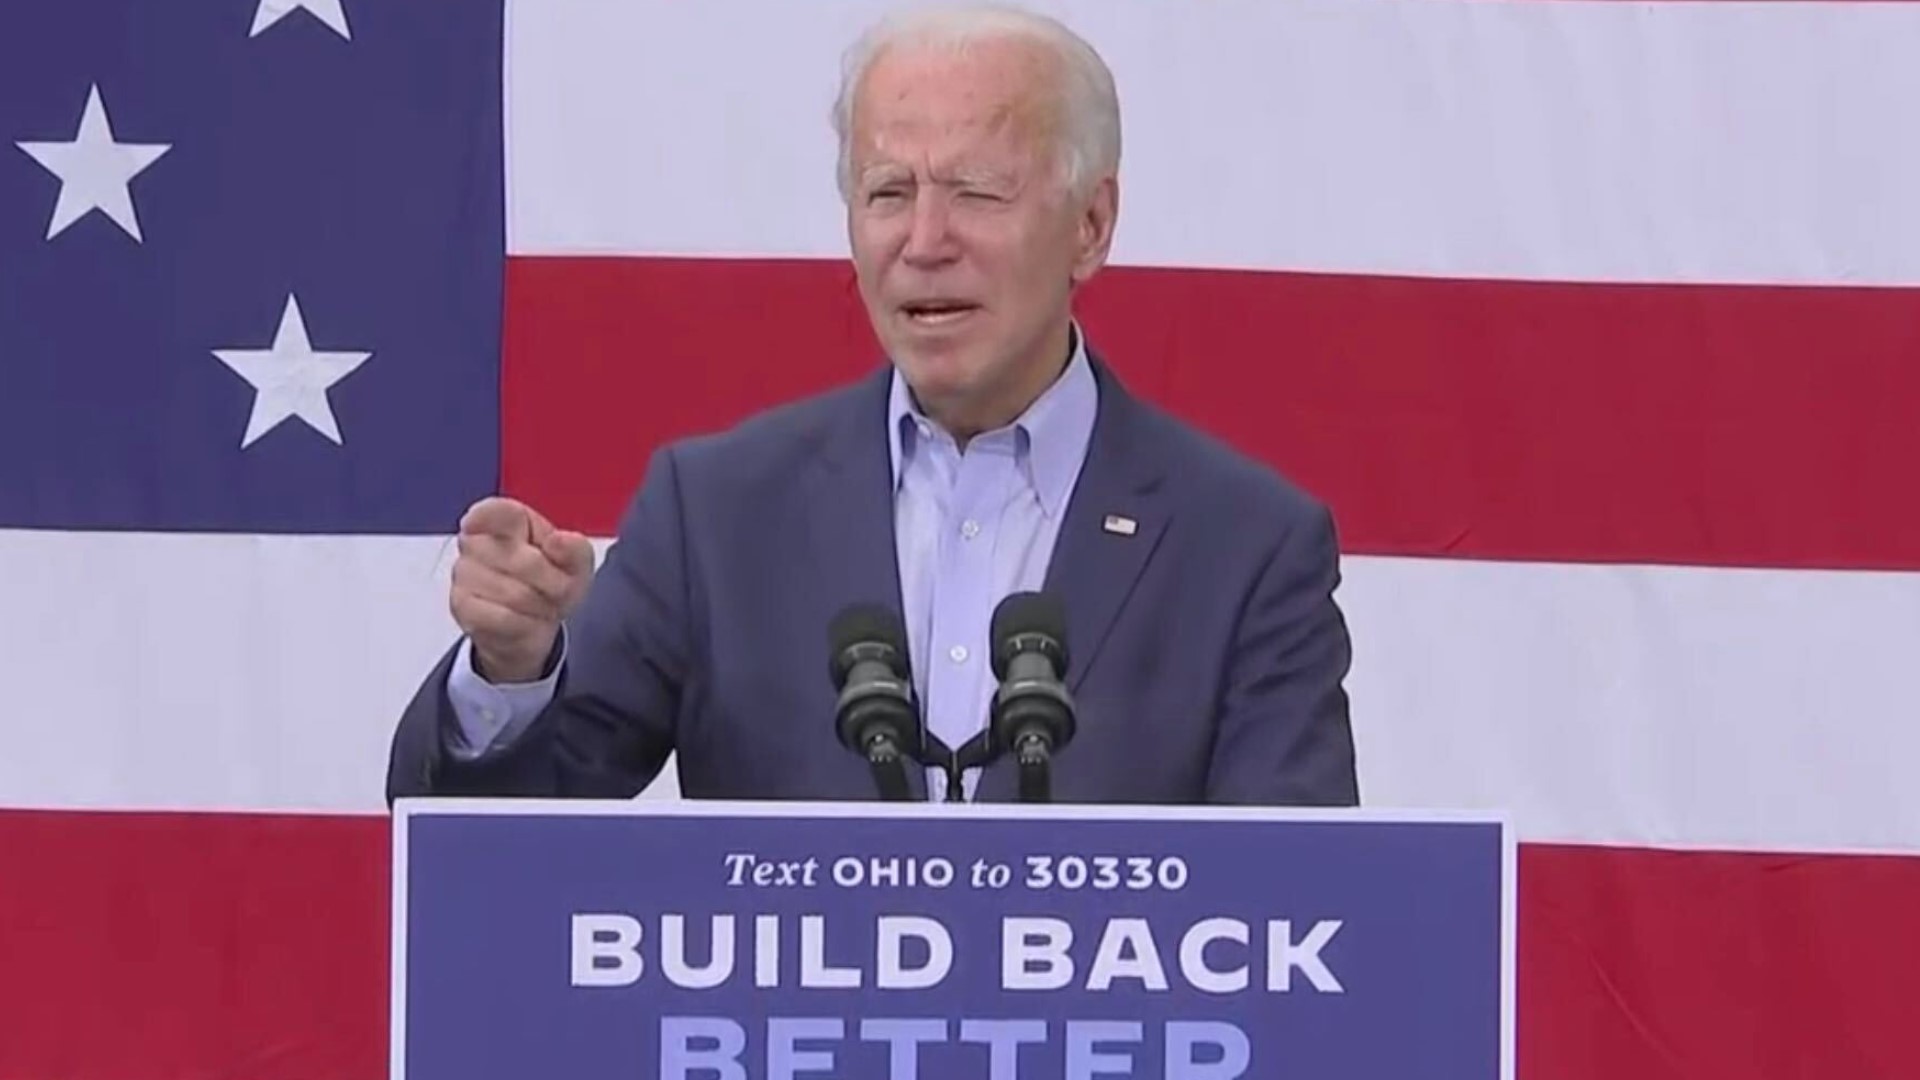 Democratic nominee Joe Biden's speech at the UAW Local 14 offered a mix of some truth and some exaggeration.